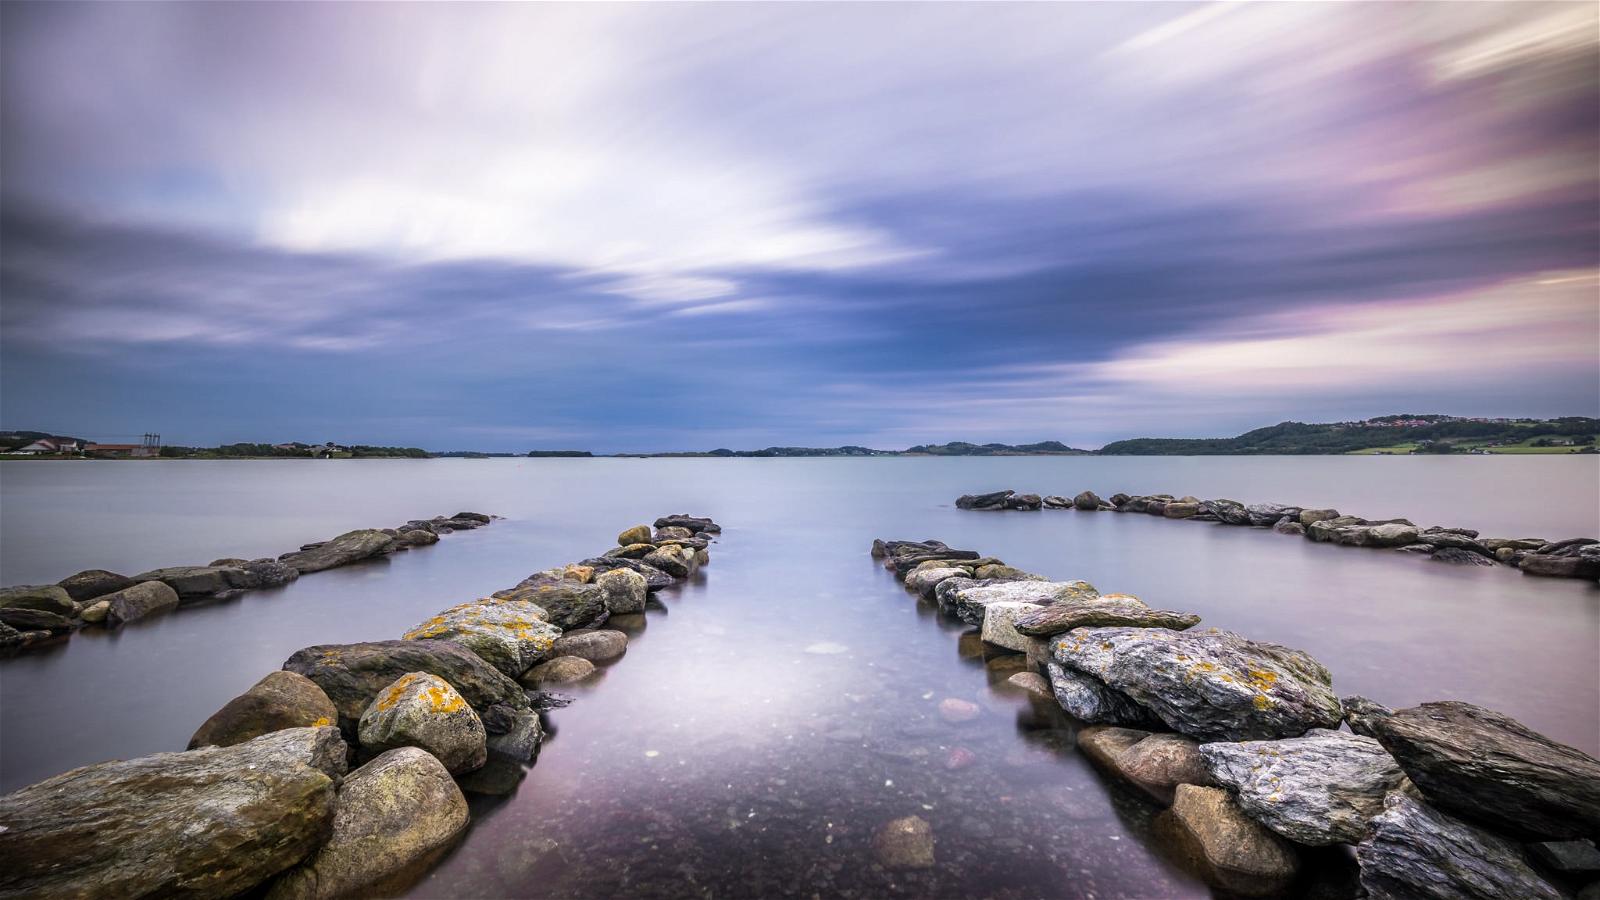 Obrázek Hafrsfjord. longexposure travel sunset sea sky seascape motion water weather norway clouds reflections landscape geotagged photography stavanger photo hafrsfjord rocks europe no sony fjord fullframe onsale ultrawide a7 rogaland bythesea sonya7 sonyfe1635